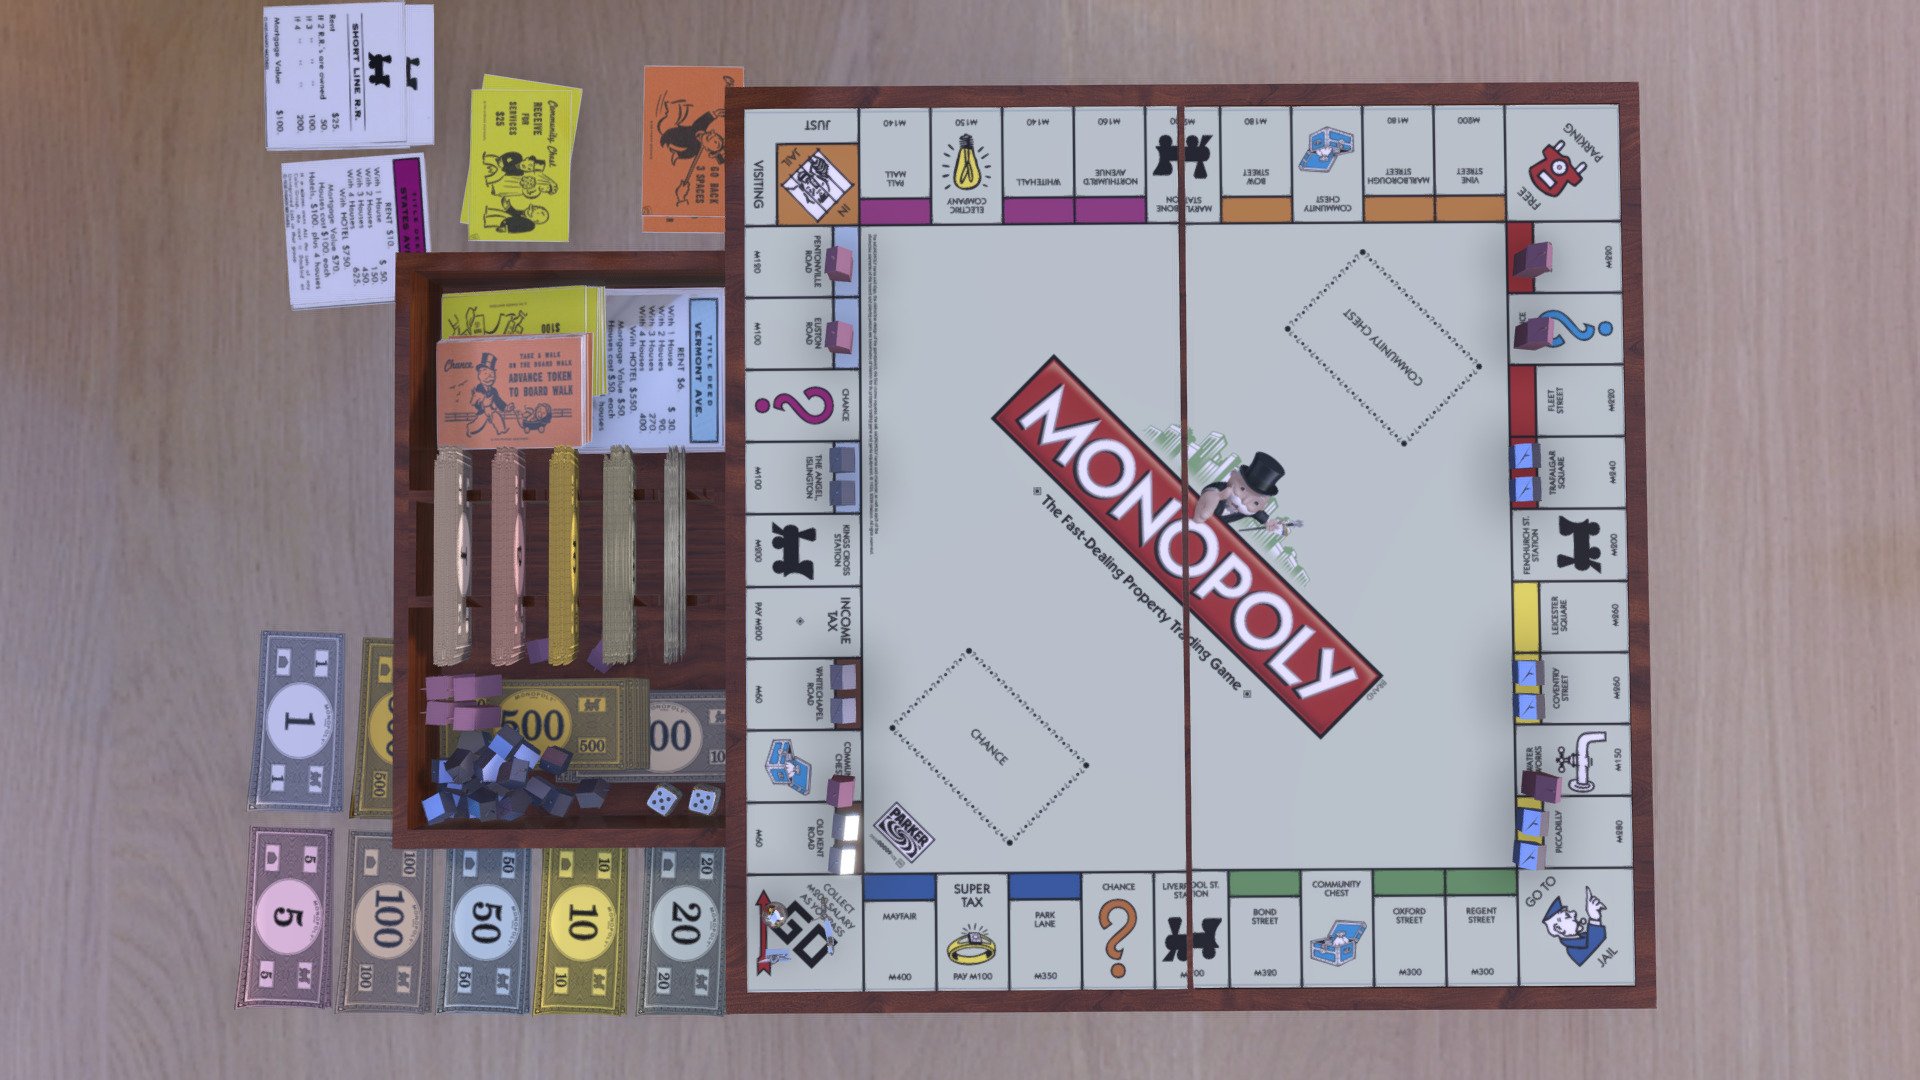 Gorgeous wood monopoly




22 cards (streets) with 8 different group colors

4 cards (railways)

2 cards (public companies)

32 houses

12 motels

16 cards (chance)

16 cards (community chest)

40 cards (1$), 40 (5$), 40 (10$), 50 (20$), 30 (50$), 20 (100$), 20 (500$).

3 pieces 

1 board (in 2 pieces) 

1 drawer with all inside

2 dices

frames here https://luismigueldirauso.wixsite.com/website/copy-of-cars-1?lightbox=dataItem-kmscls7t - MONOPOLY - Buy Royalty Free 3D model by luismi93 3d model